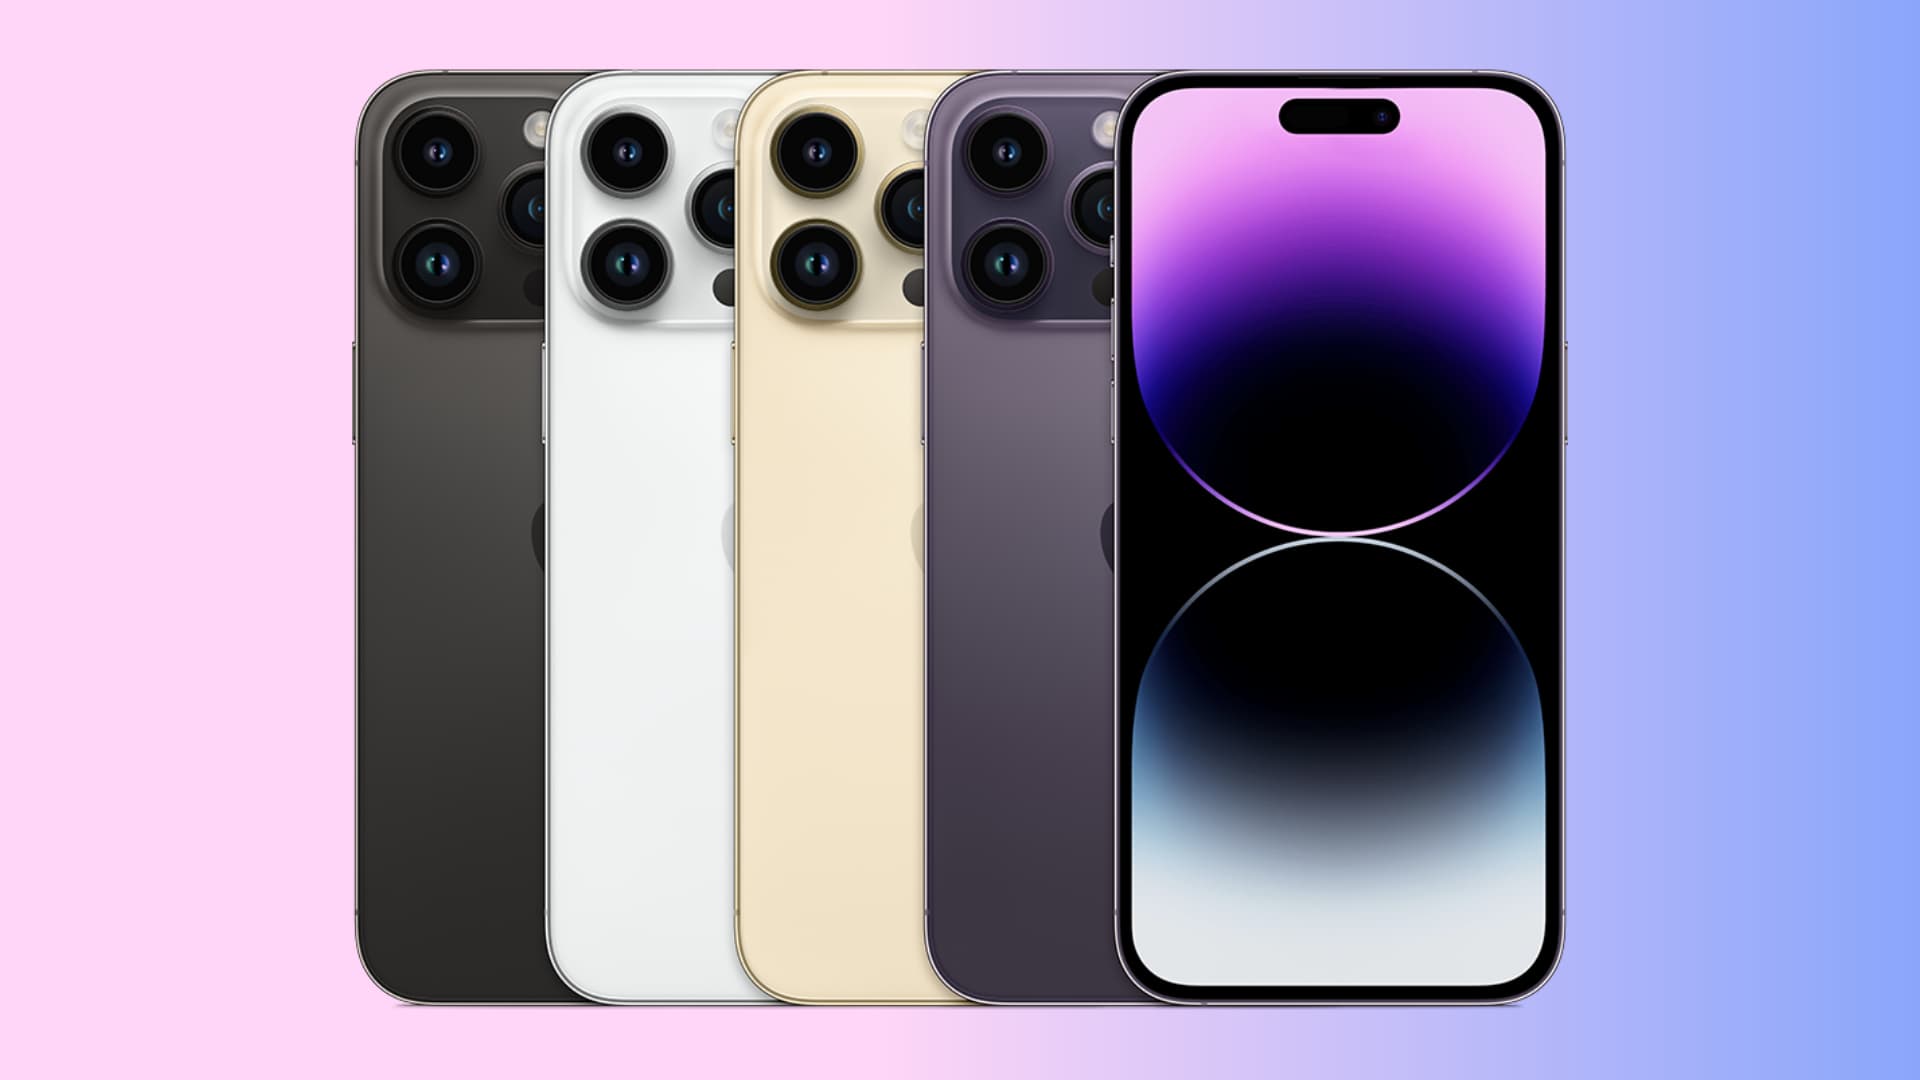 iPhone 14 Pro in all colors